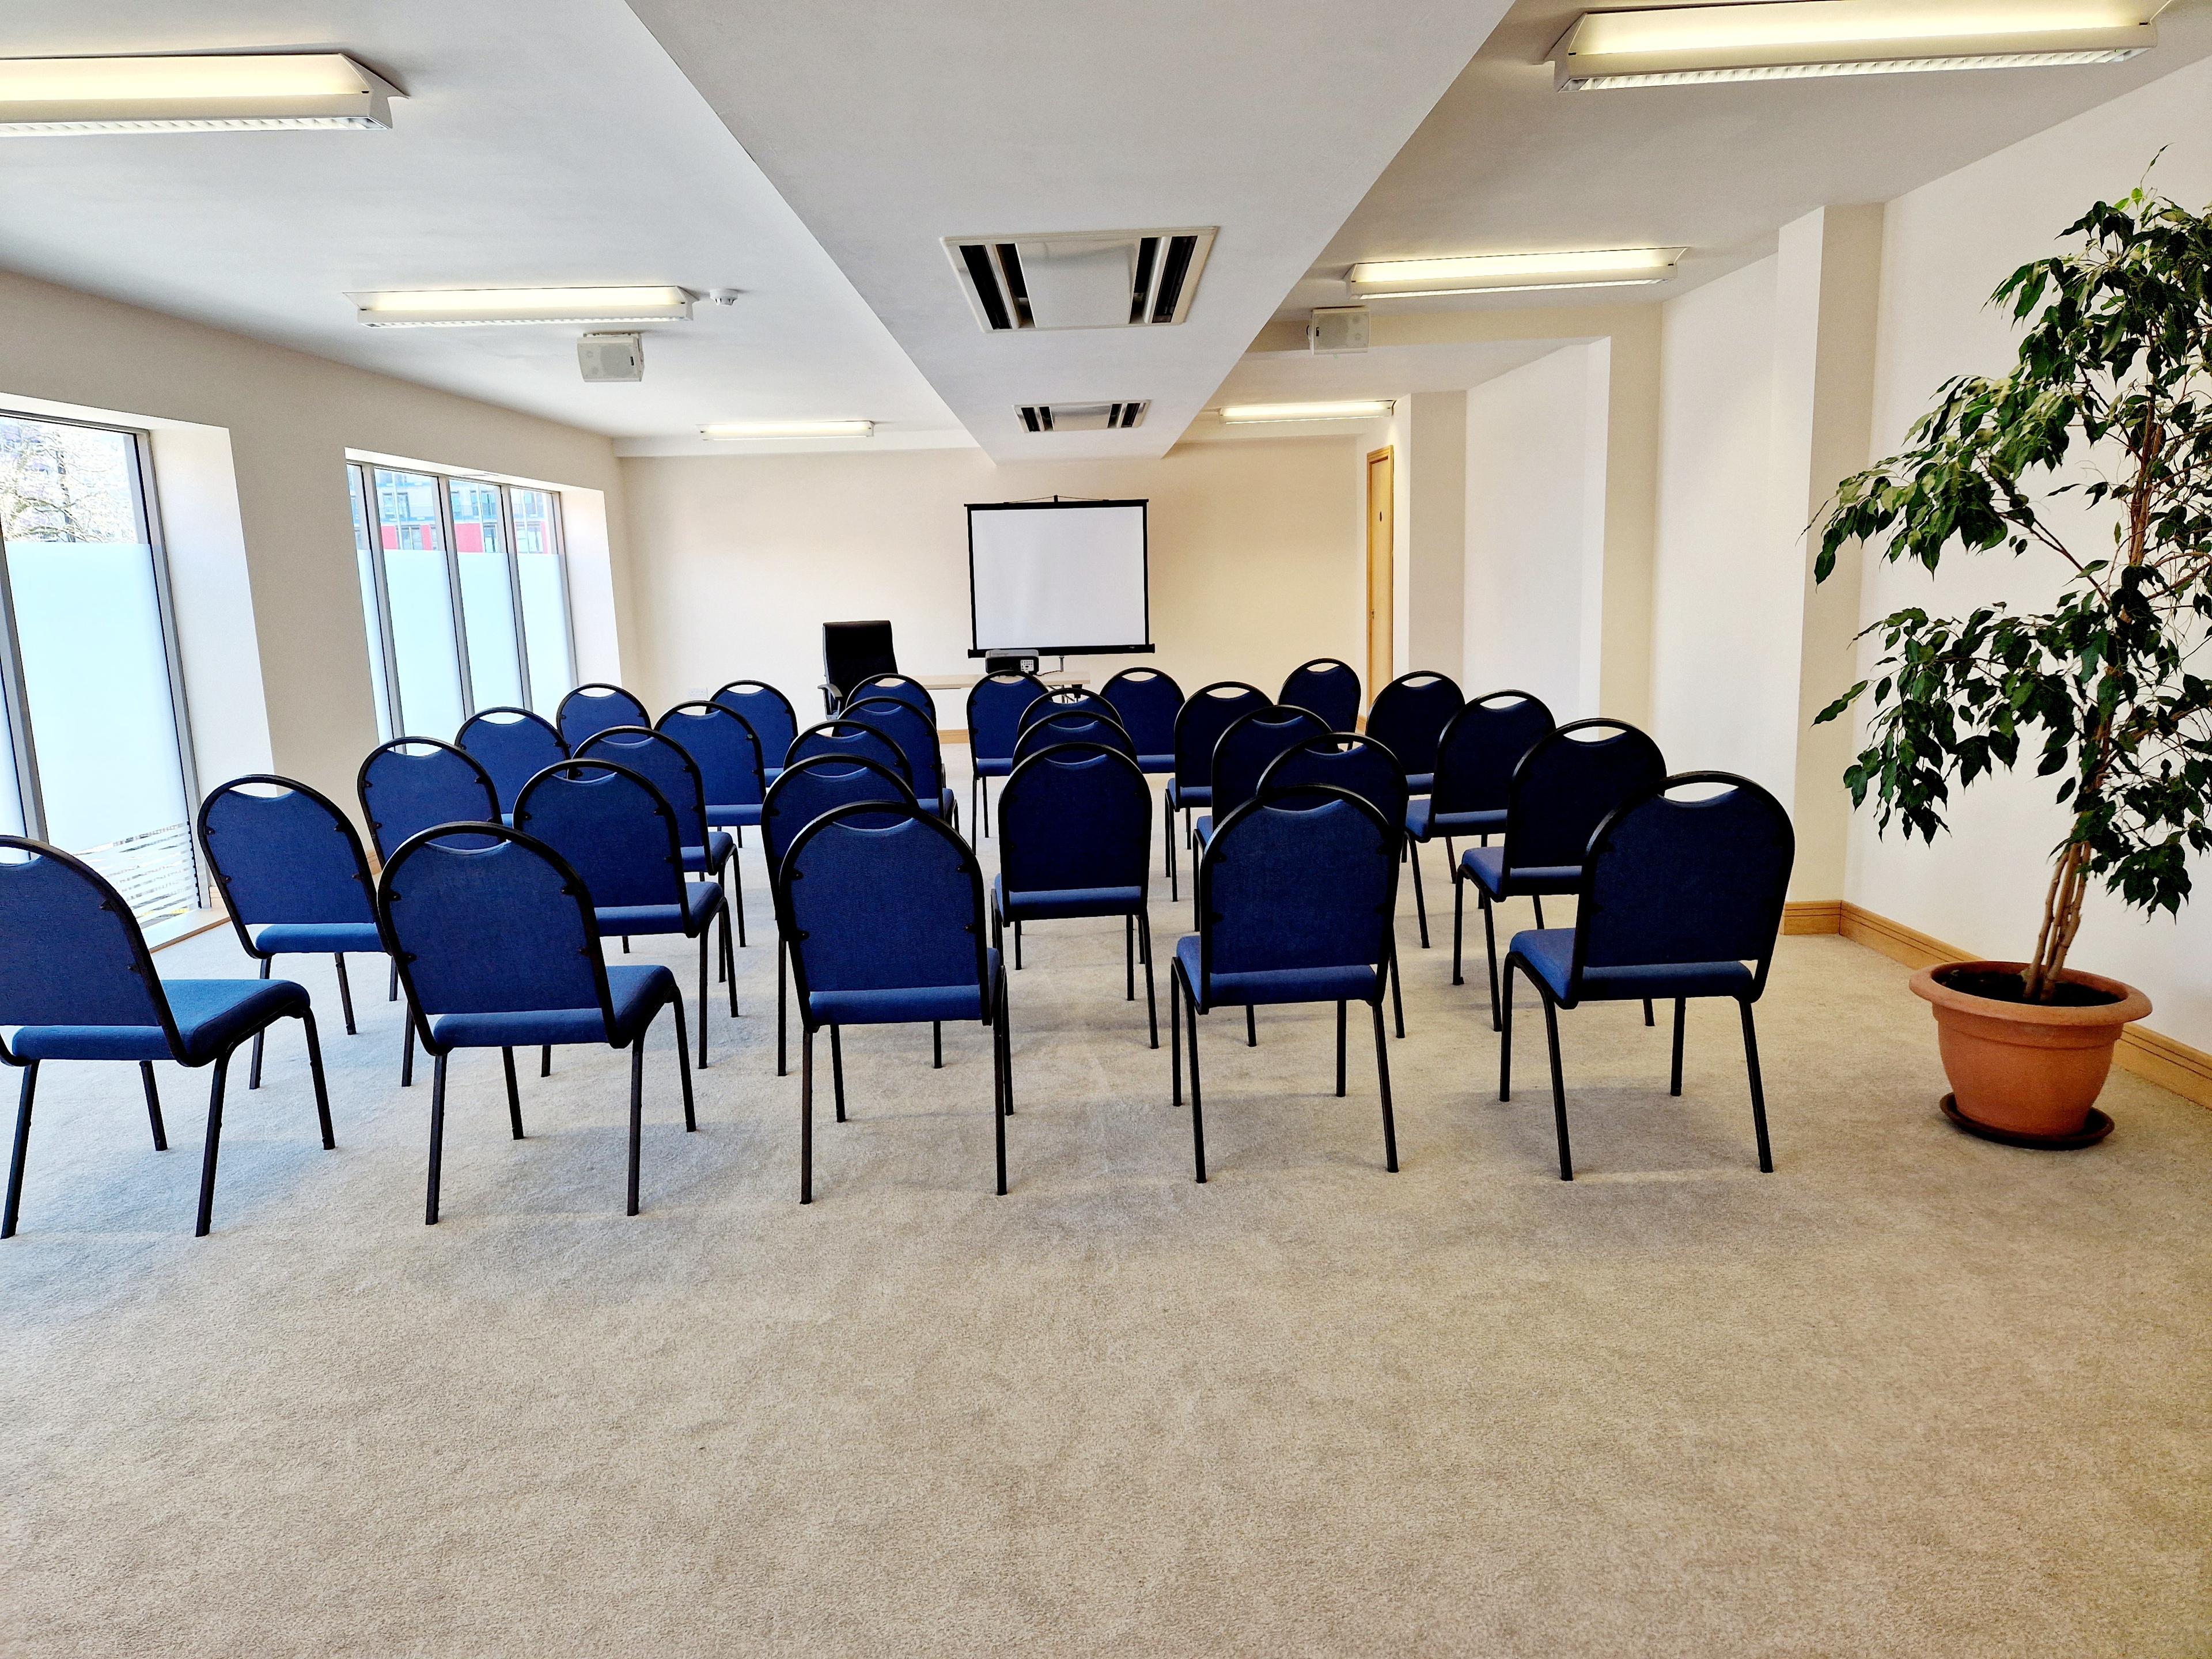 44 Blucher Street, Bright And Spacious Meeting Space, undefined photo #1